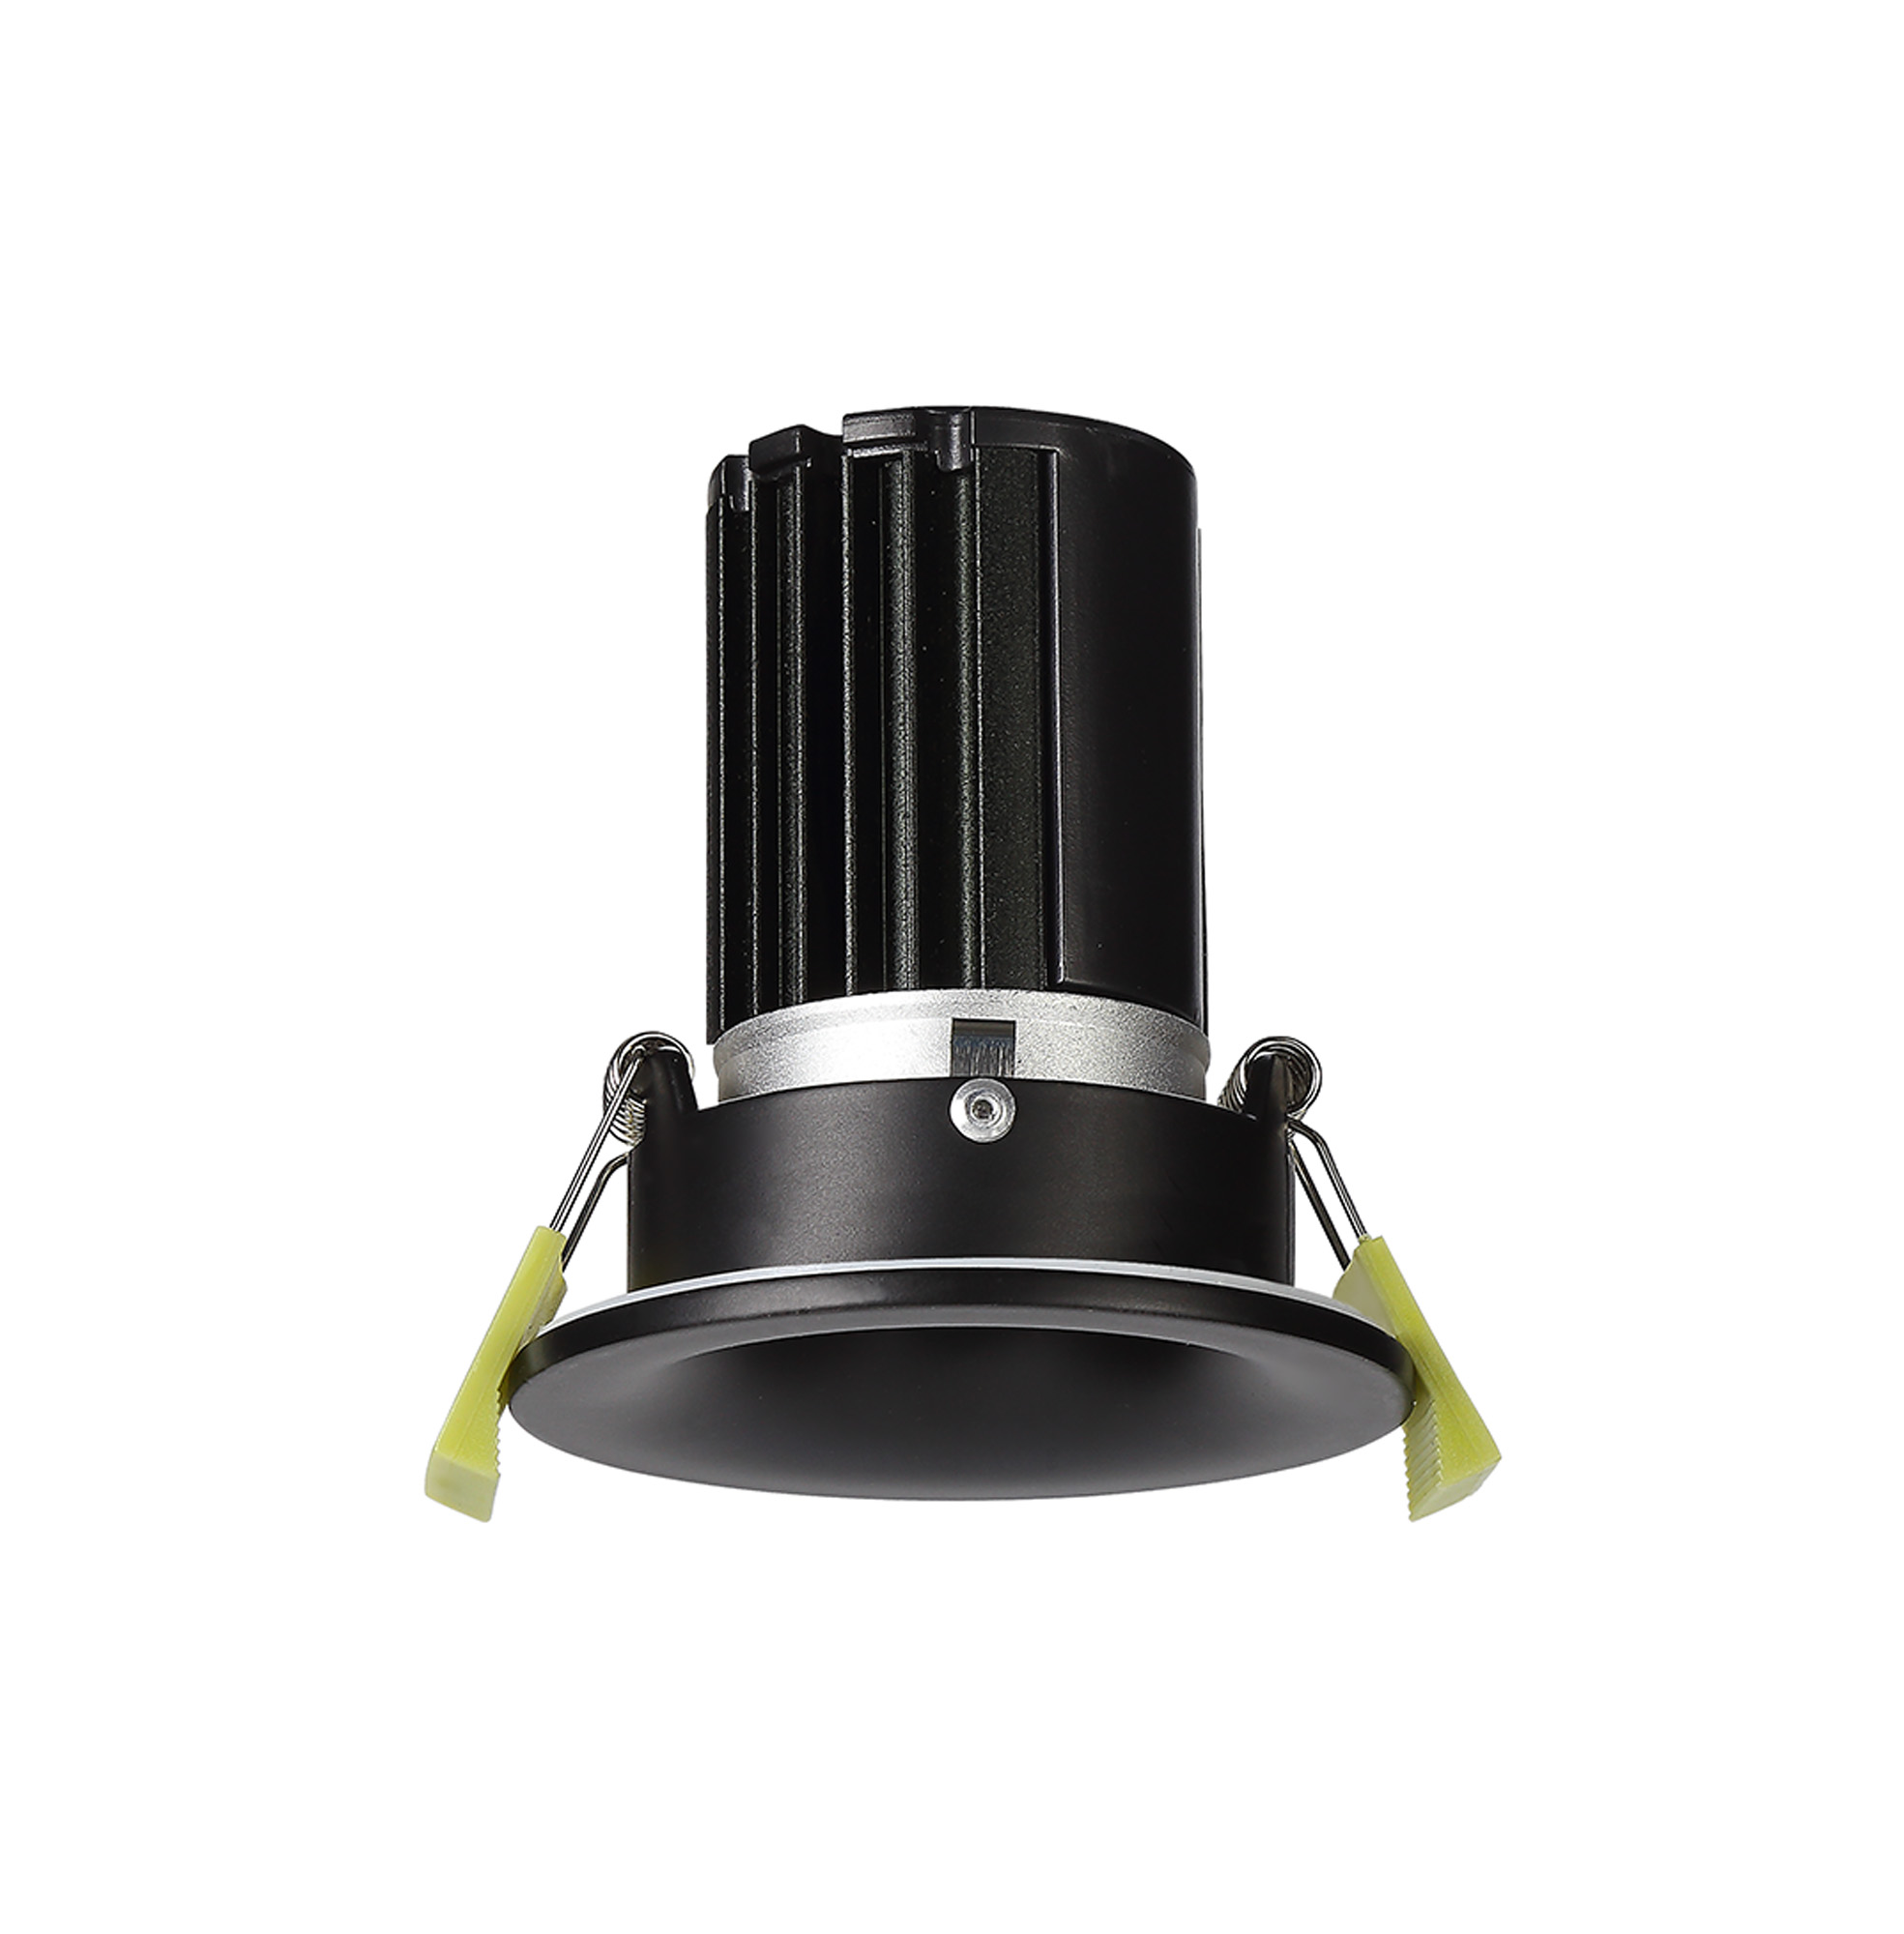 DM201462  Bruve 9 Tridonic powered 9W 2700K 700lm 24° LED Engine,250mA , CRI>90 LED Engine Matt Black Fixed Round Recessed Downlight, Inner Glass cover, IP65